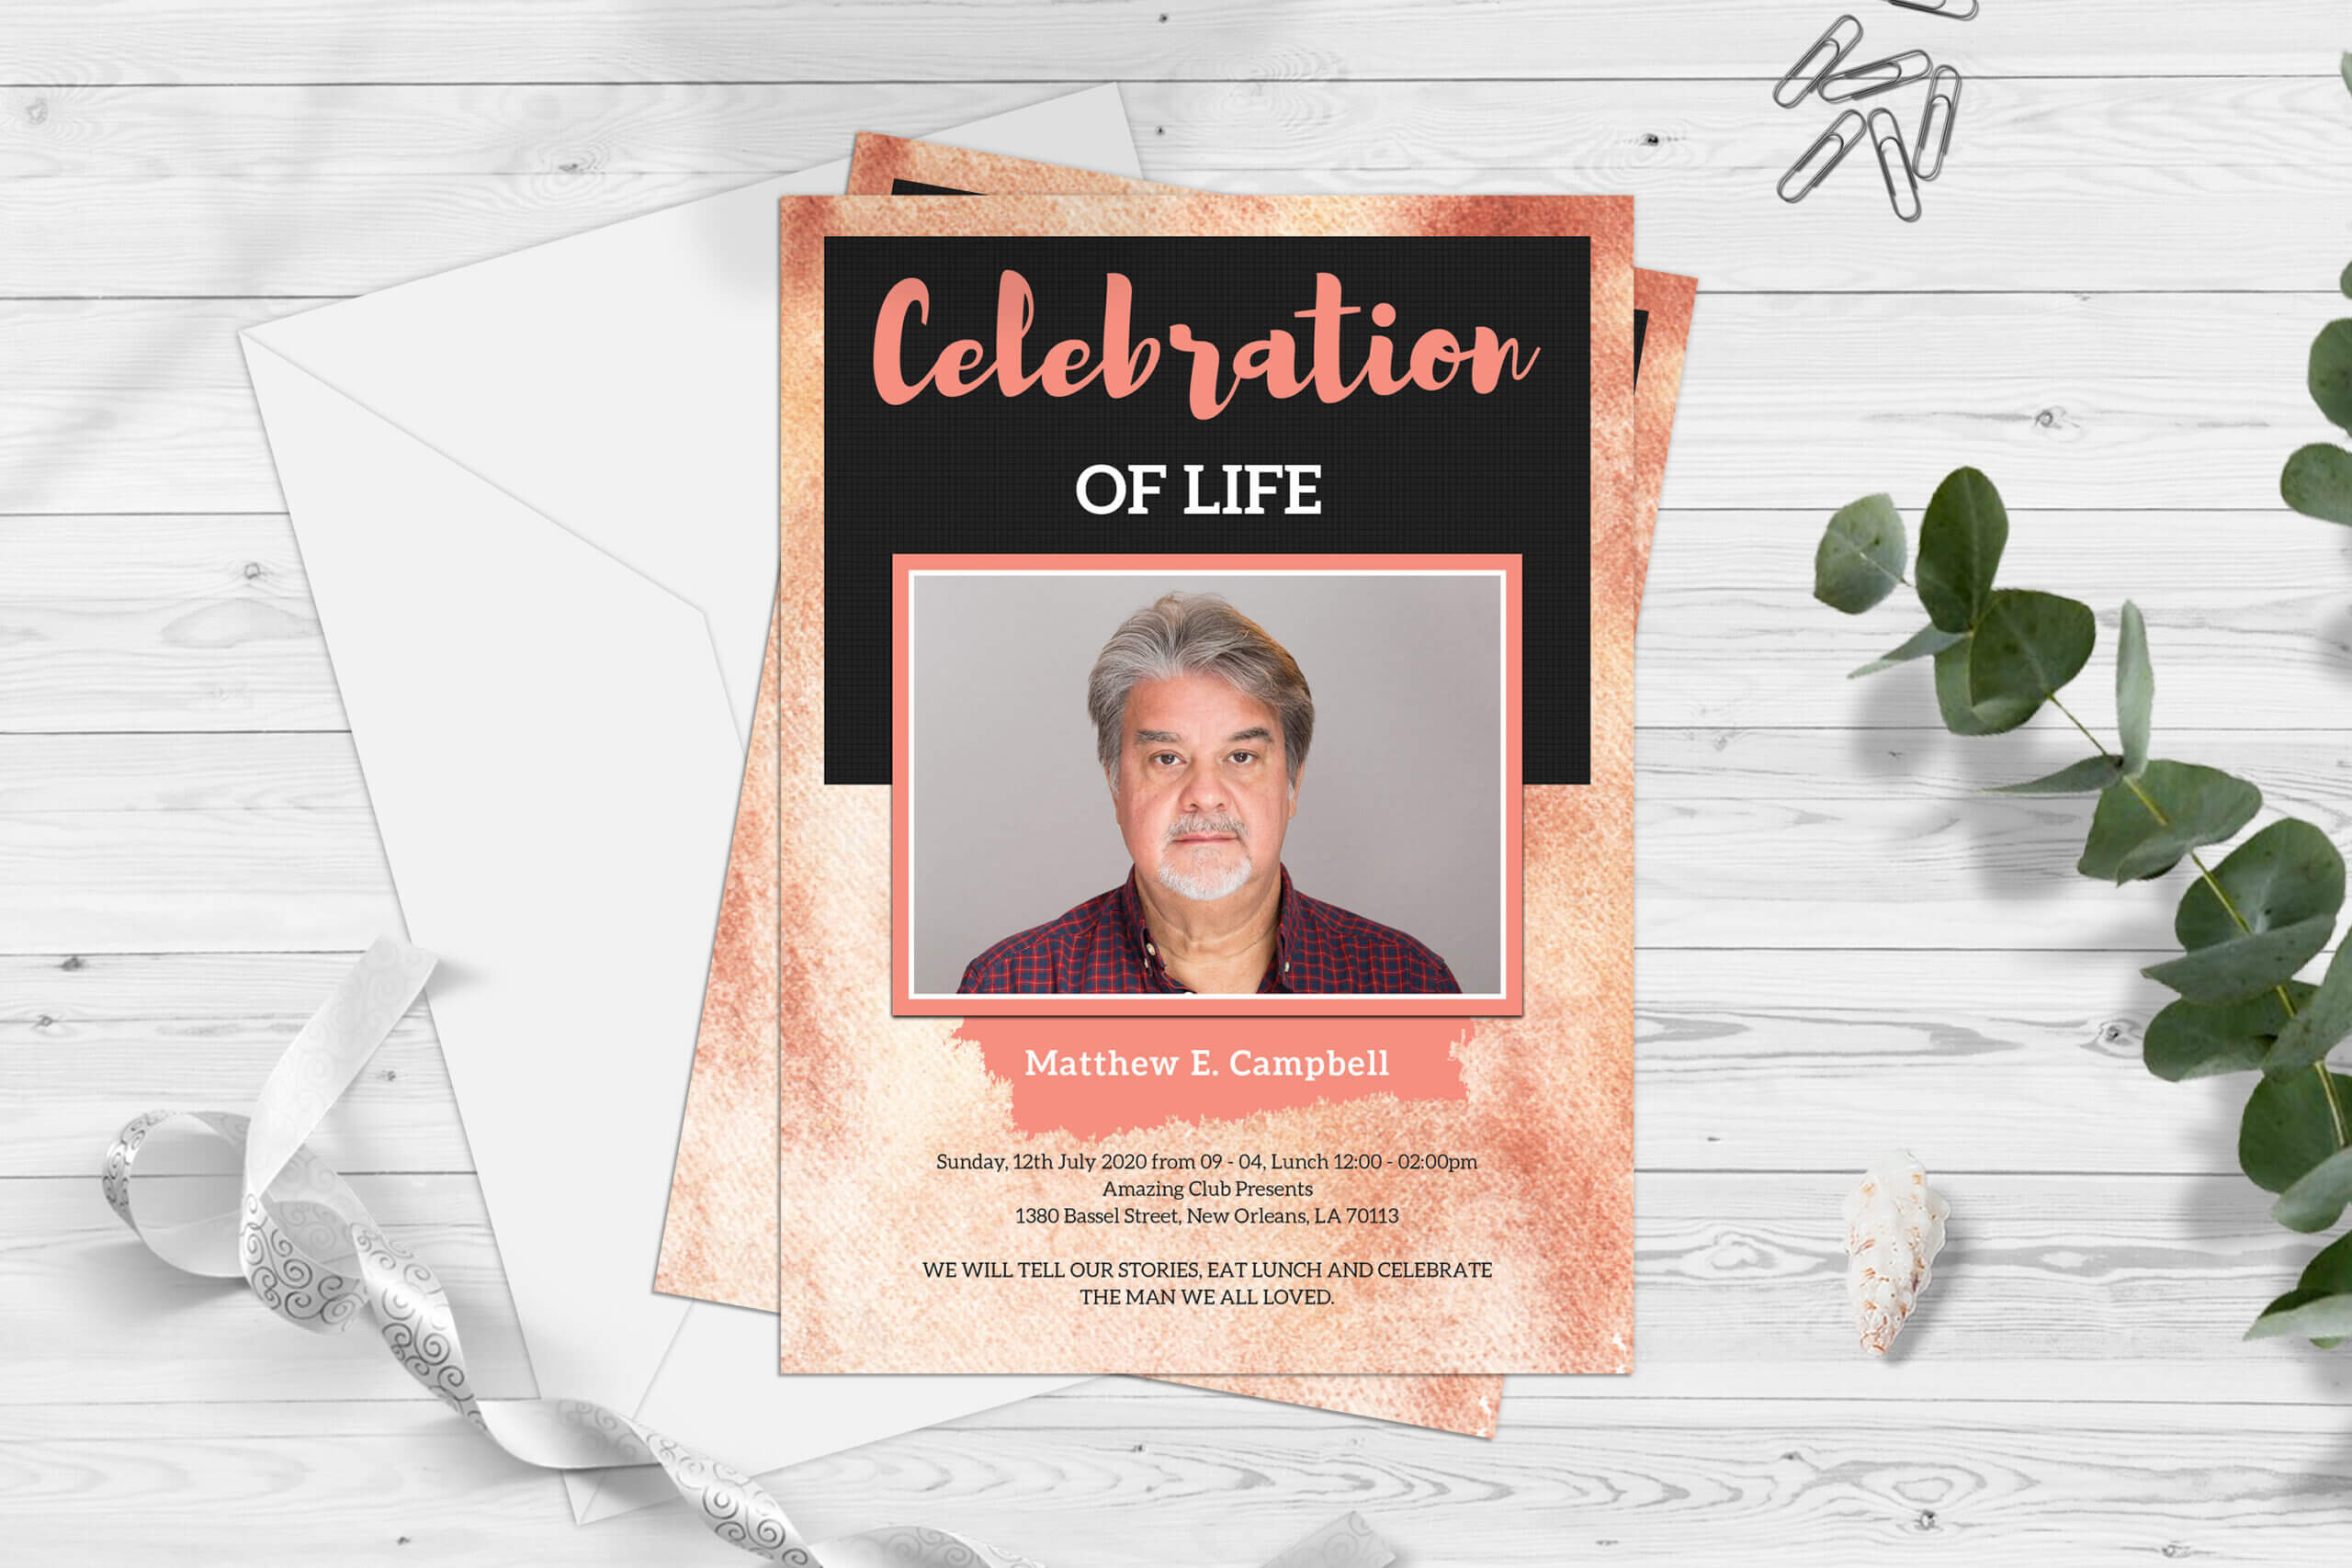 Celebration Of Life Funeral Program Invitation Card Template Intended For Funeral Invitation Card Template